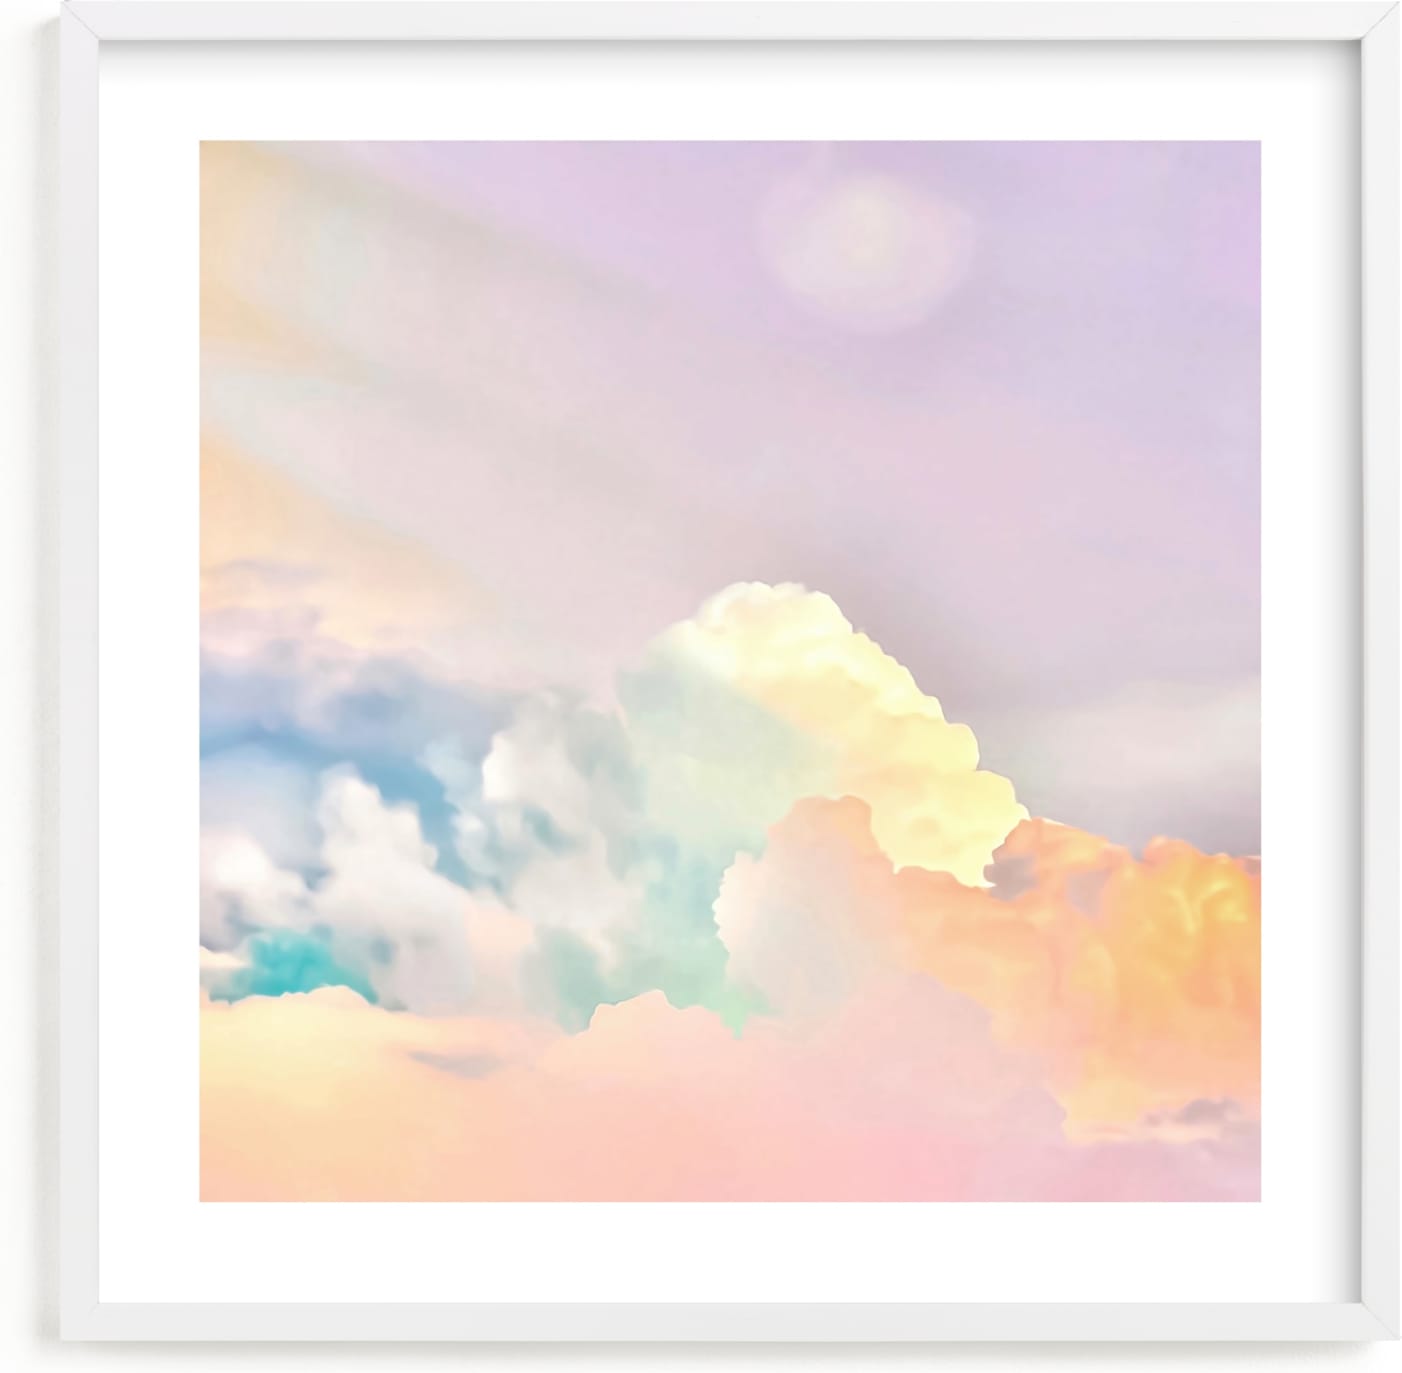 This is a purple, pink art by Melissa Agular called Ice Cream Clouds.